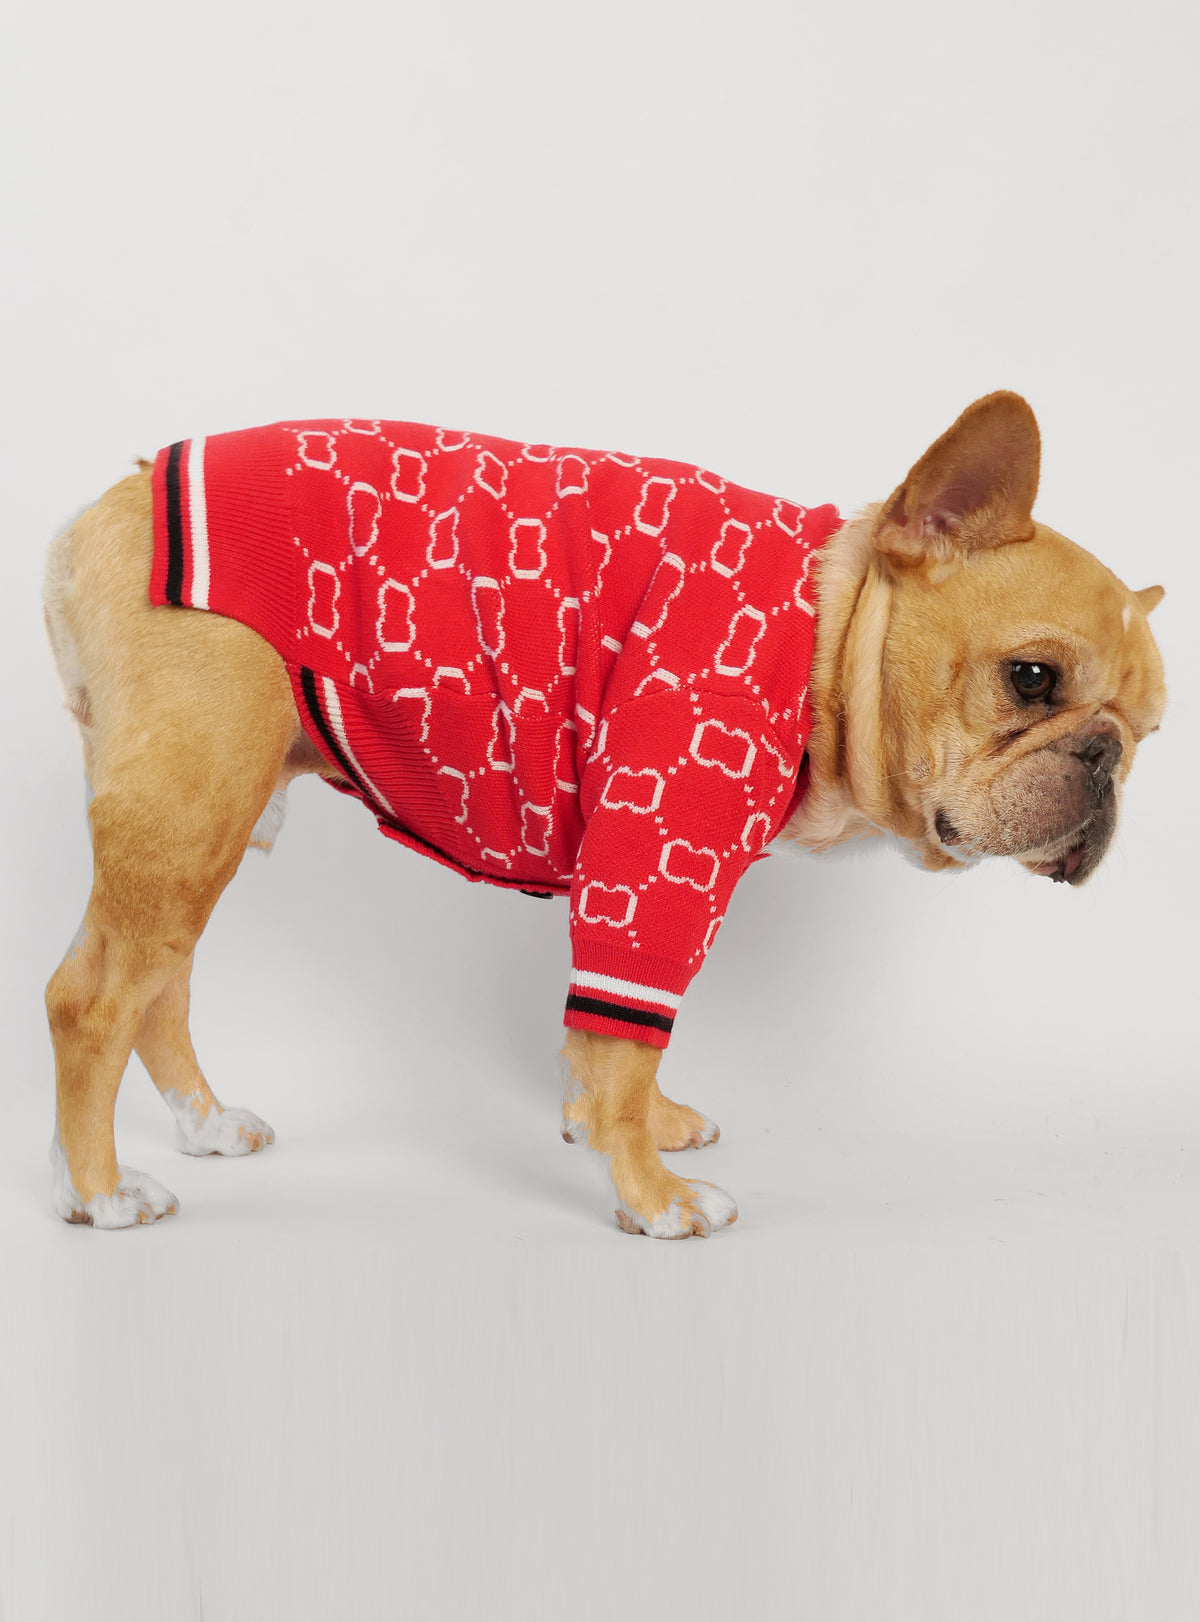 Candy Apple Dog Sweater